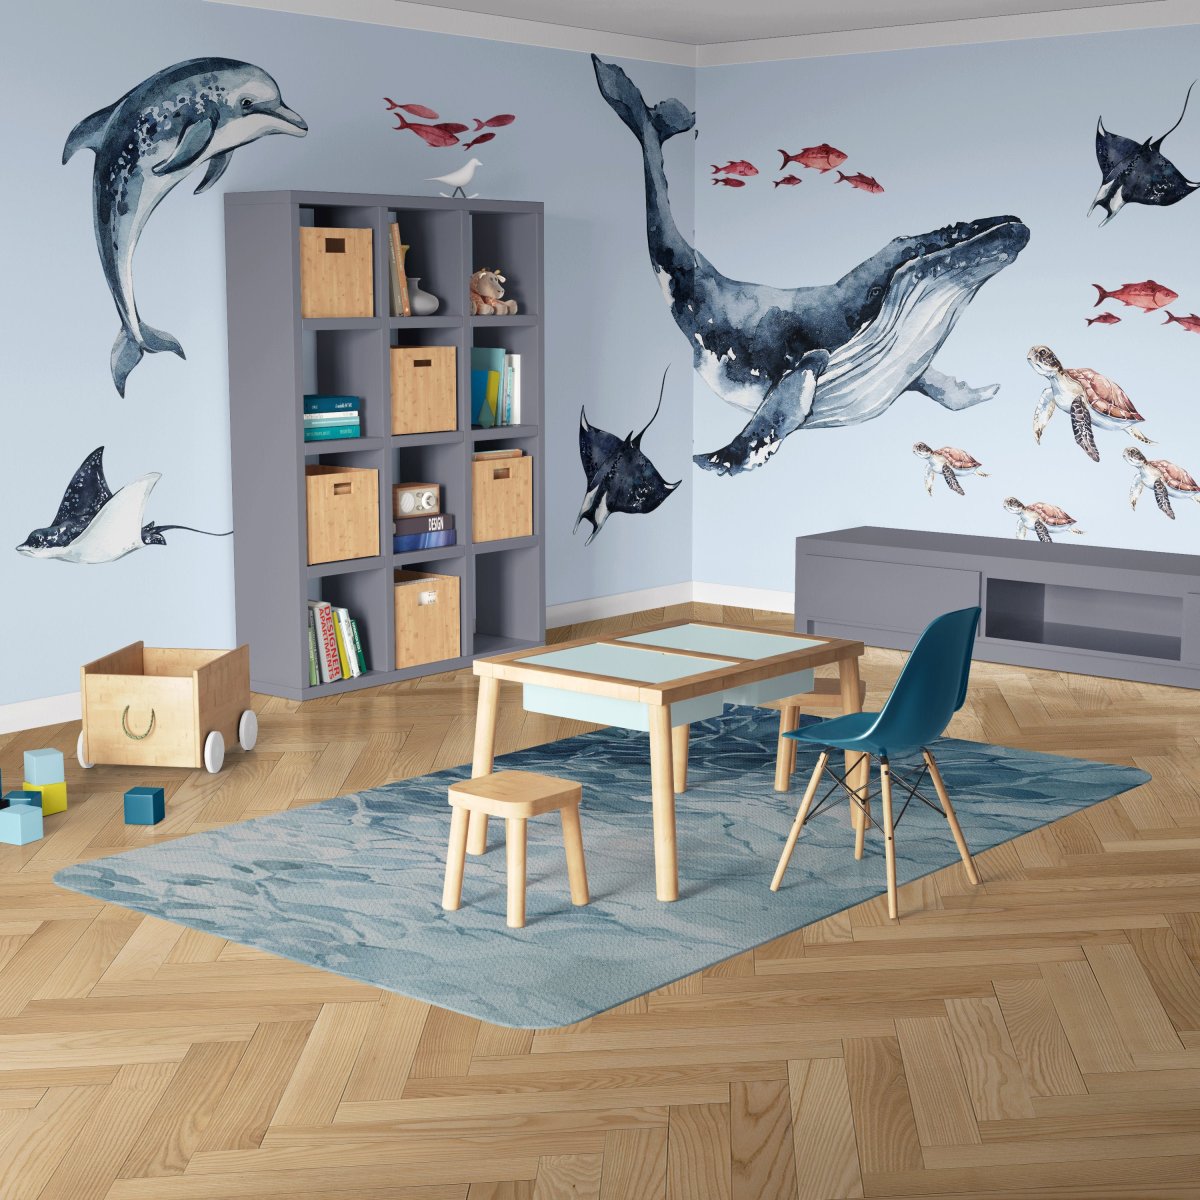 Ocean Life with whale, dolphin, ray, turtles for kids room or nursery, whale wall decal